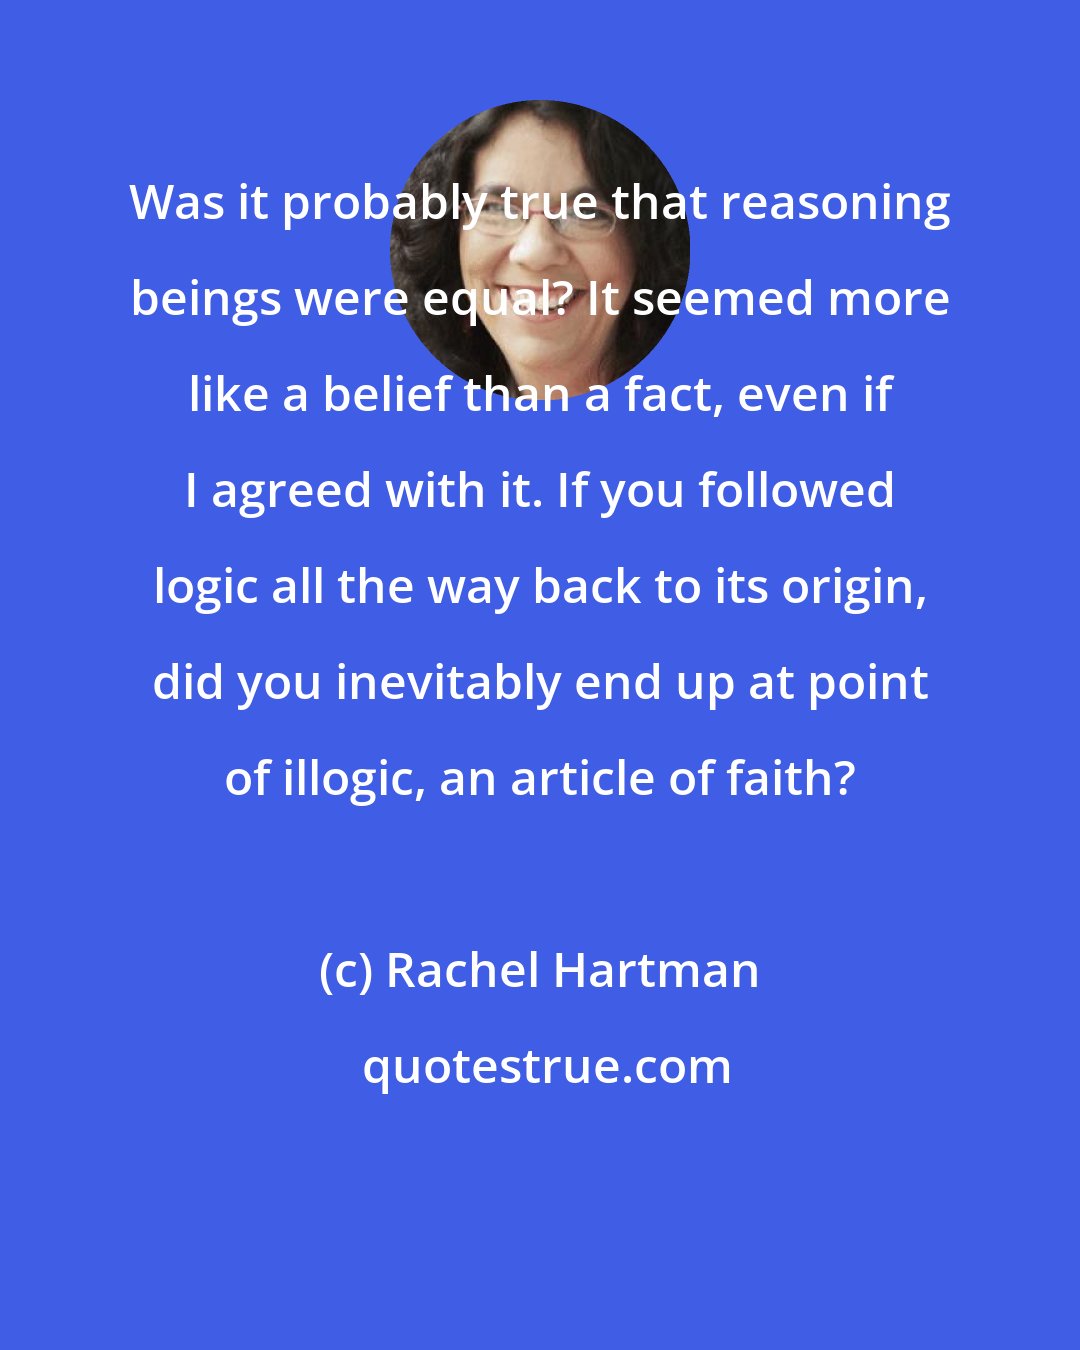 Rachel Hartman: Was it probably true that reasoning beings were equal? It seemed more like a belief than a fact, even if I agreed with it. If you followed logic all the way back to its origin, did you inevitably end up at point of illogic, an article of faith?